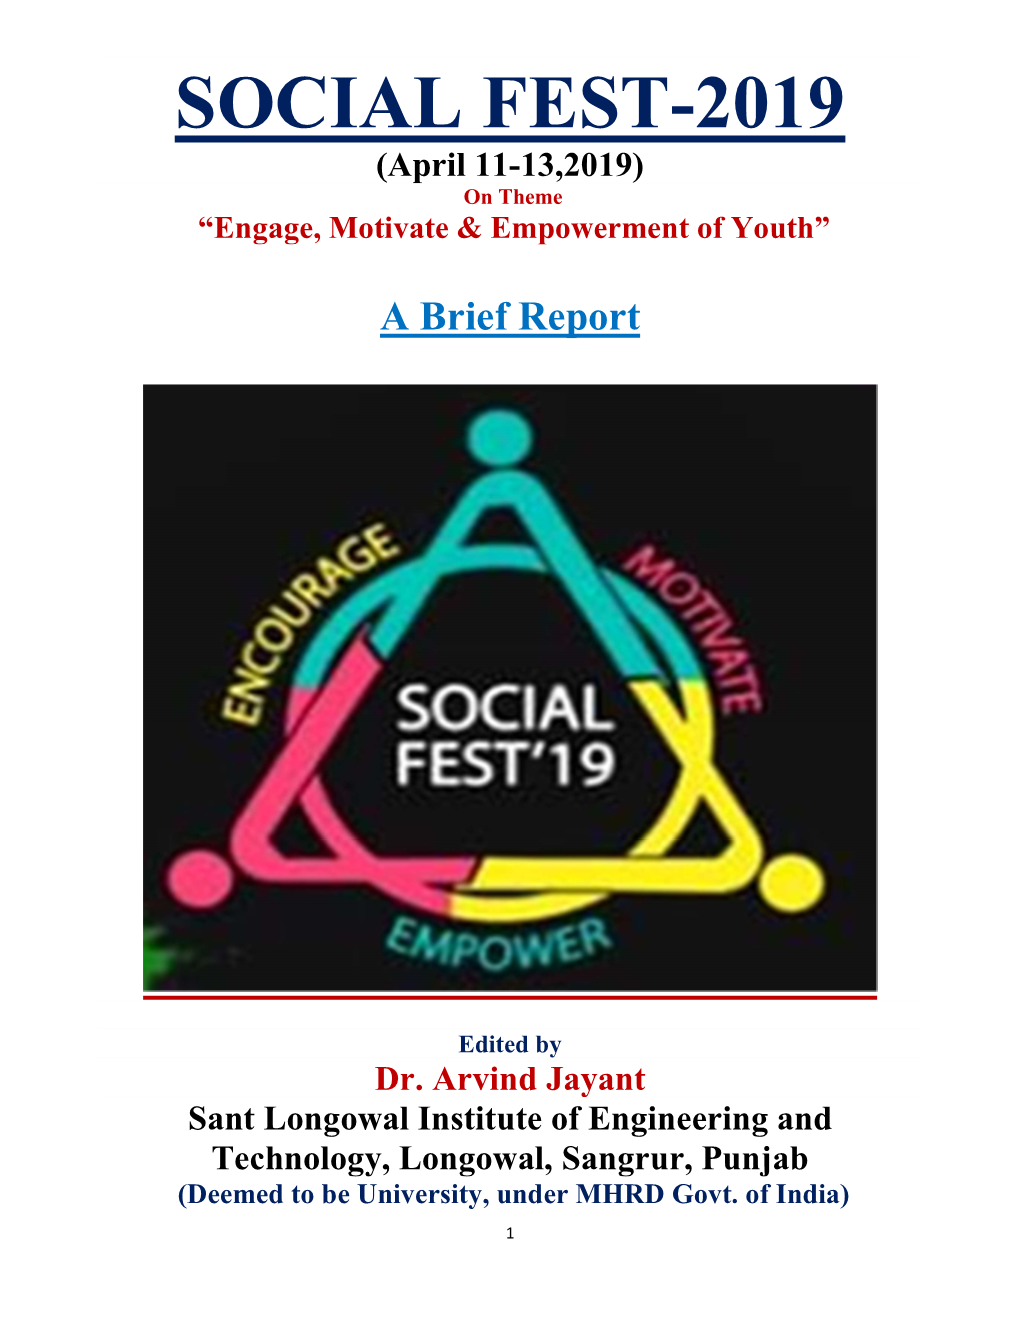 SOCIAL FEST-2019 (April 11-13,2019) on Theme “Engage, Motivate & Empowerment of Youth”